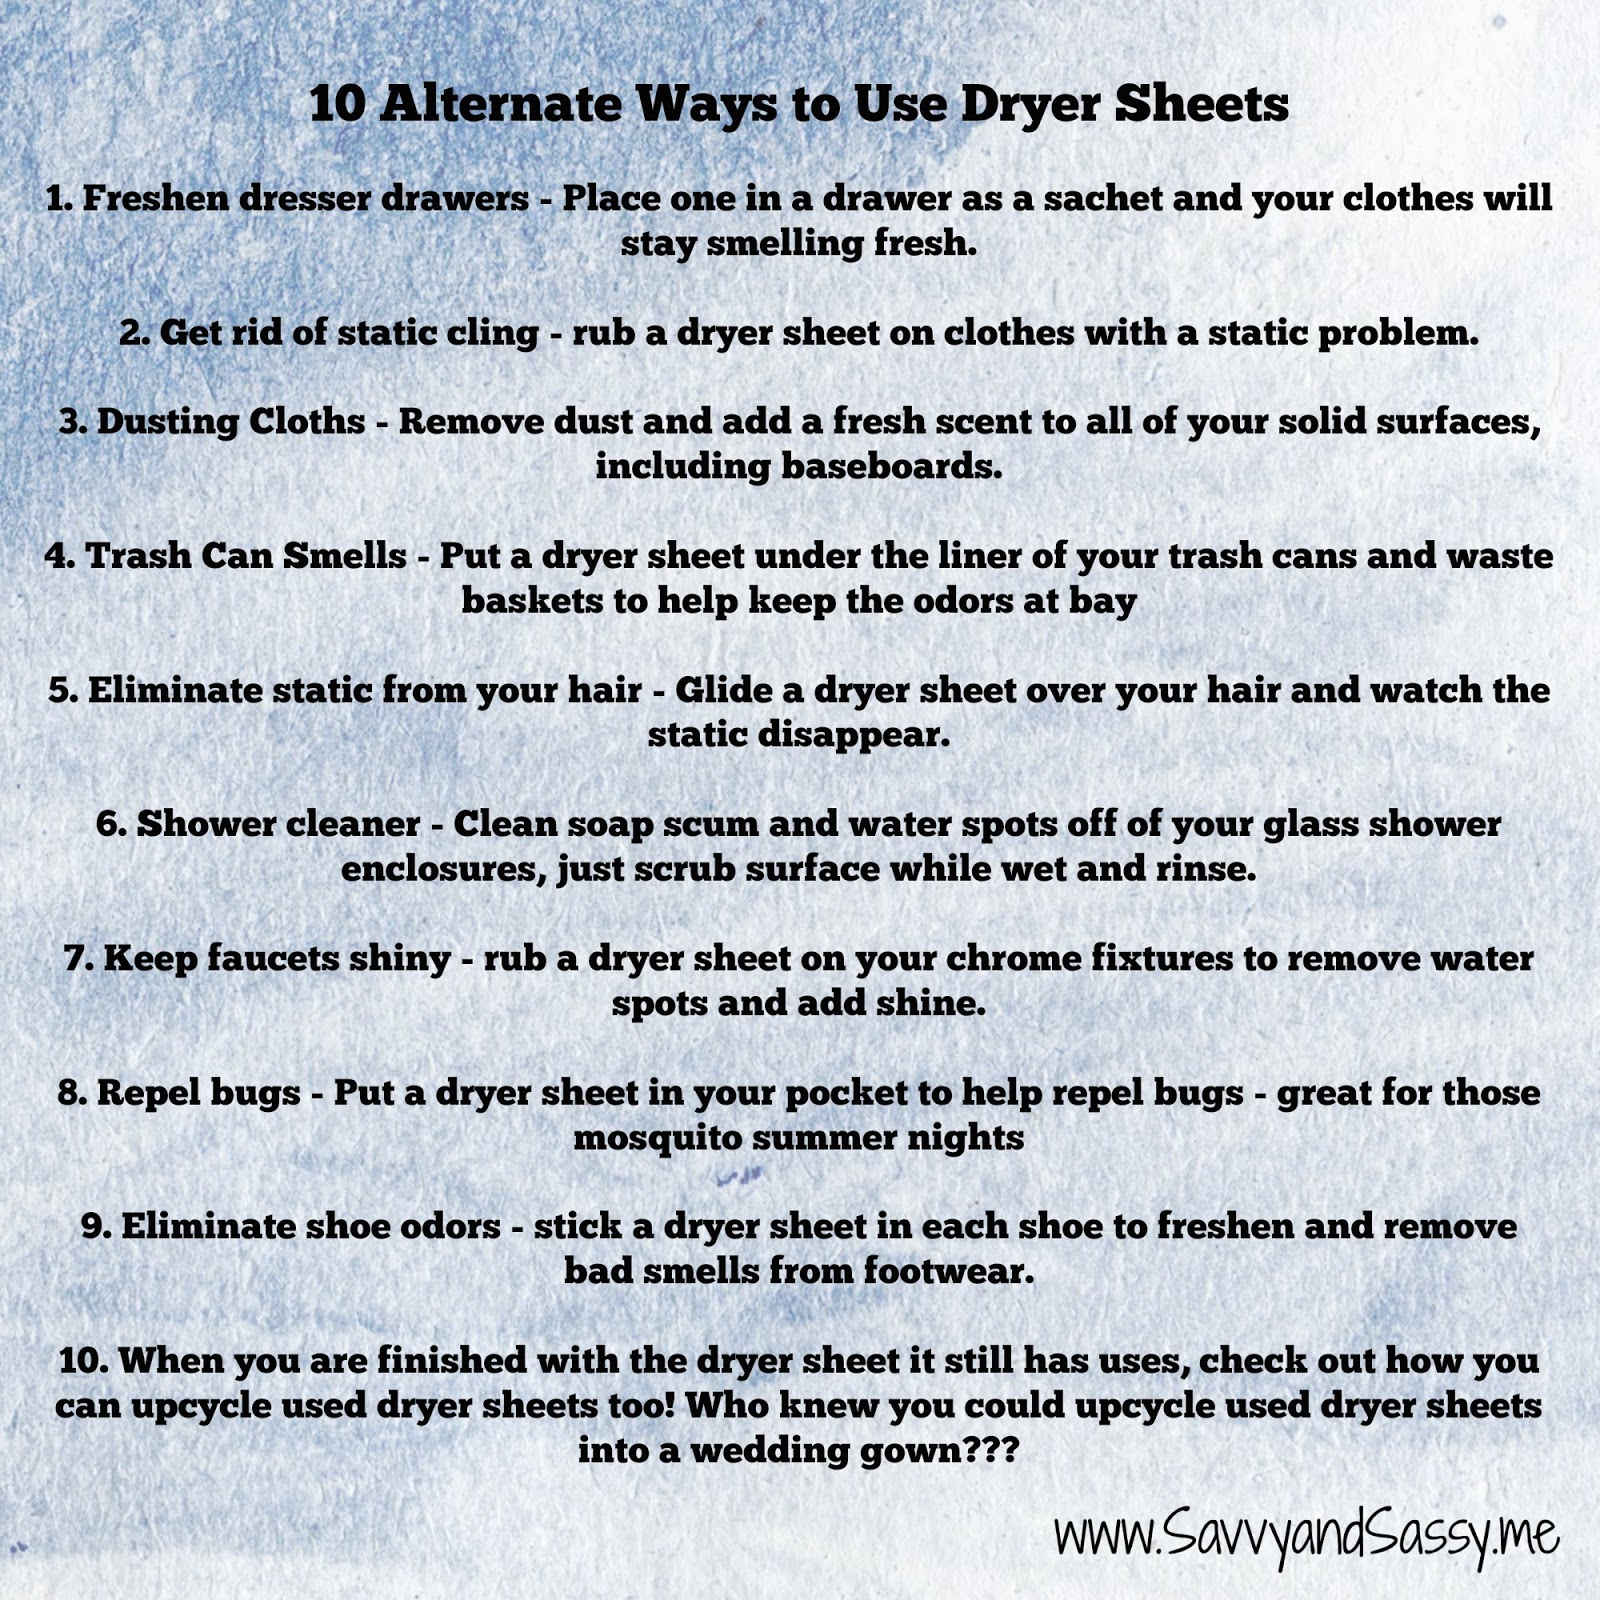 Savvy And Sassy 10 Alternate Ways To Use Dryer Sheets Purex